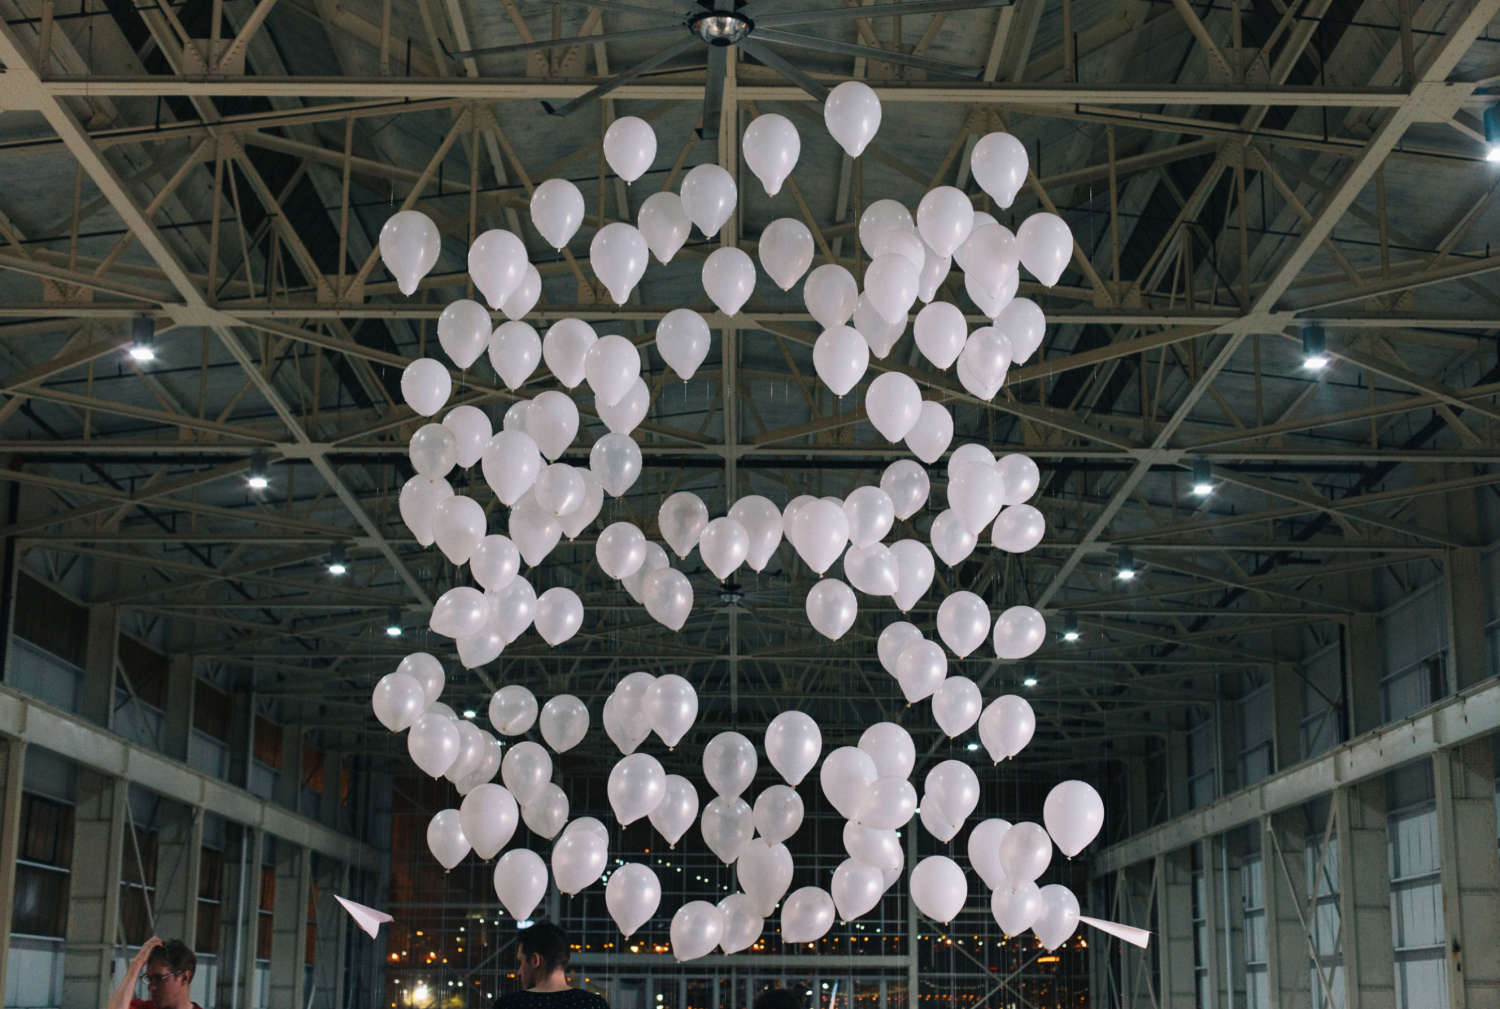 Balloons released at Brooklyn Beta